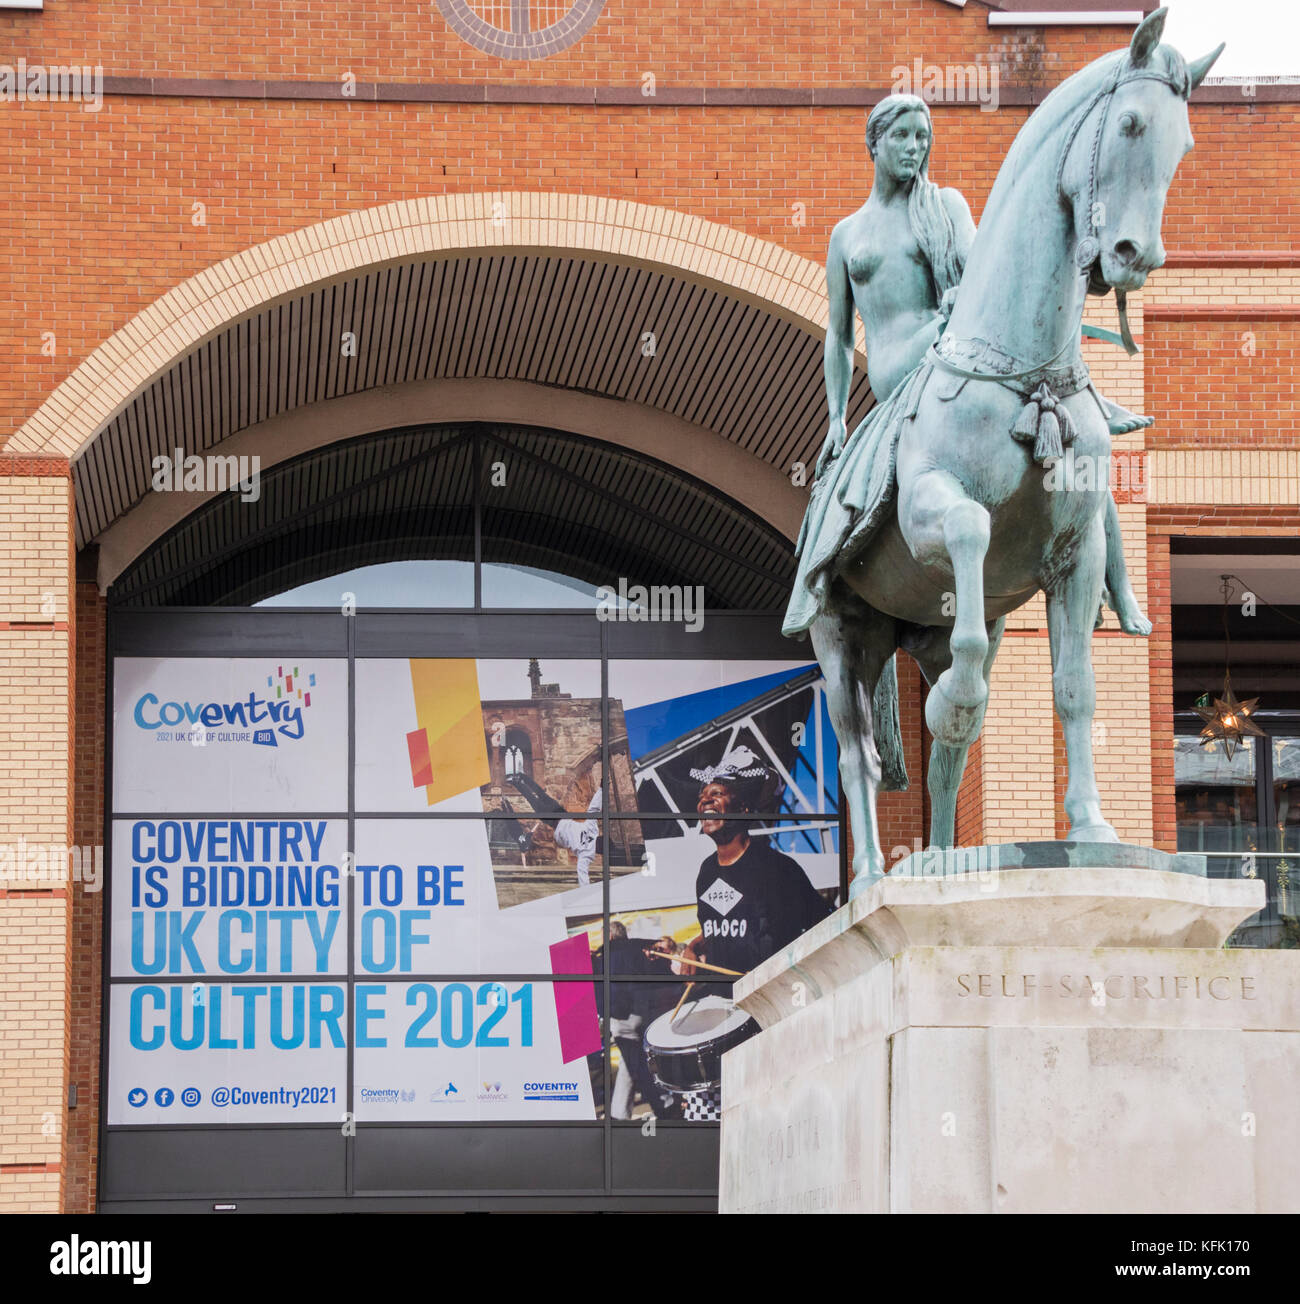 Poster promoting Coventry's bid to host the City of culture 2021 with Lady Godiva statue, Coventry, England, UK Stock Photo